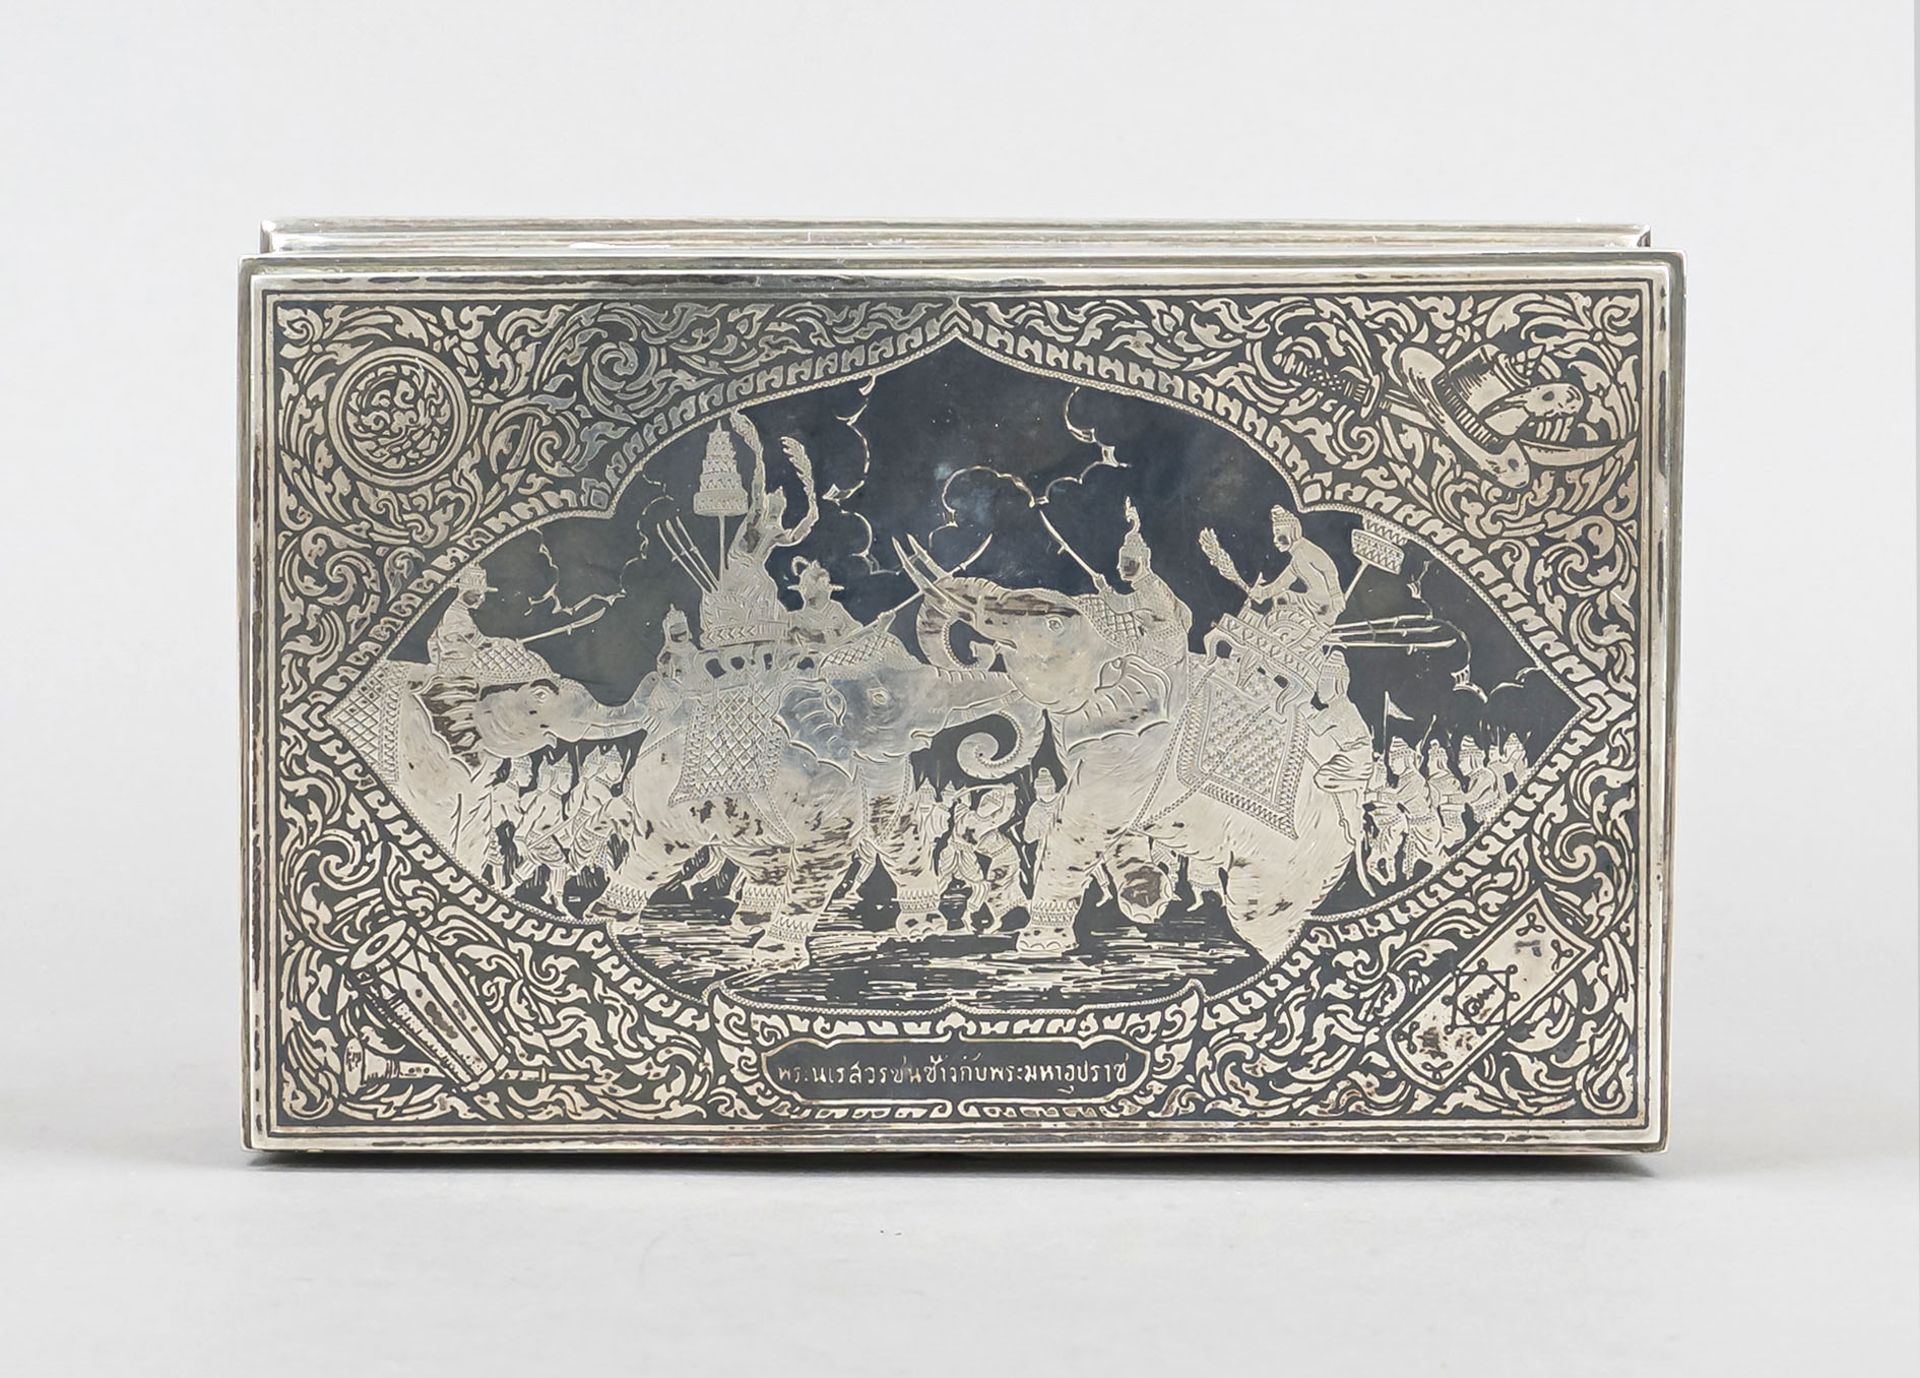 Rectangular cigar box, Siam, early 20th century, marked Thai Nakon, sterling silver 925/000, - Image 2 of 2